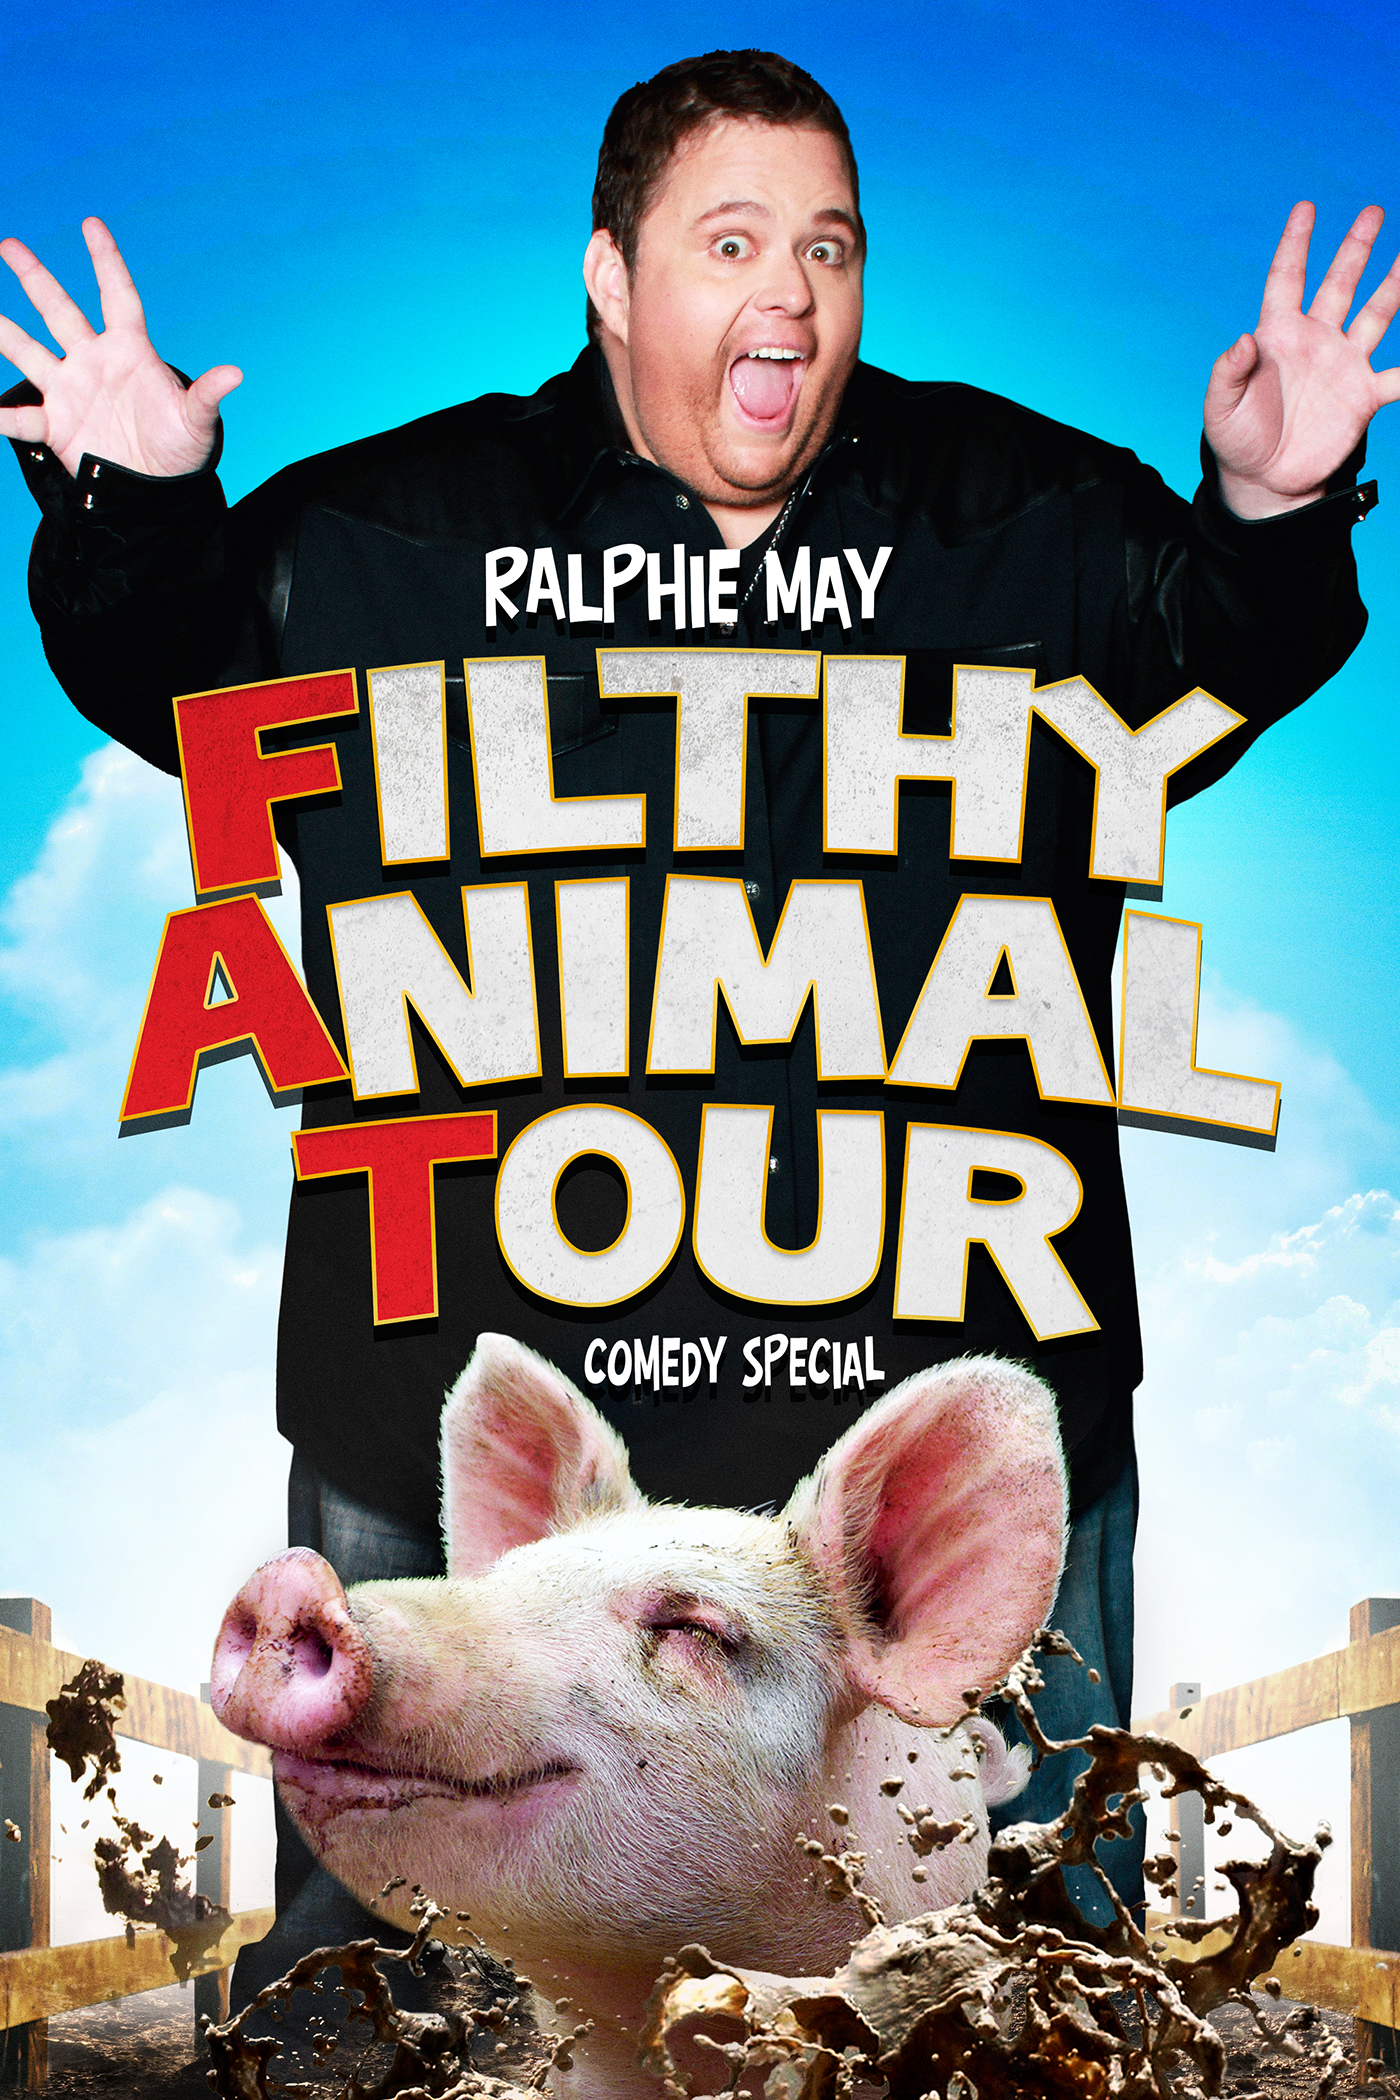 Ralphie May, Danielle Stewart, Chuck Roy, Billy Wayne Davis and The Smash Brothers in Ralphie May Filthy Animal Tour (2014)